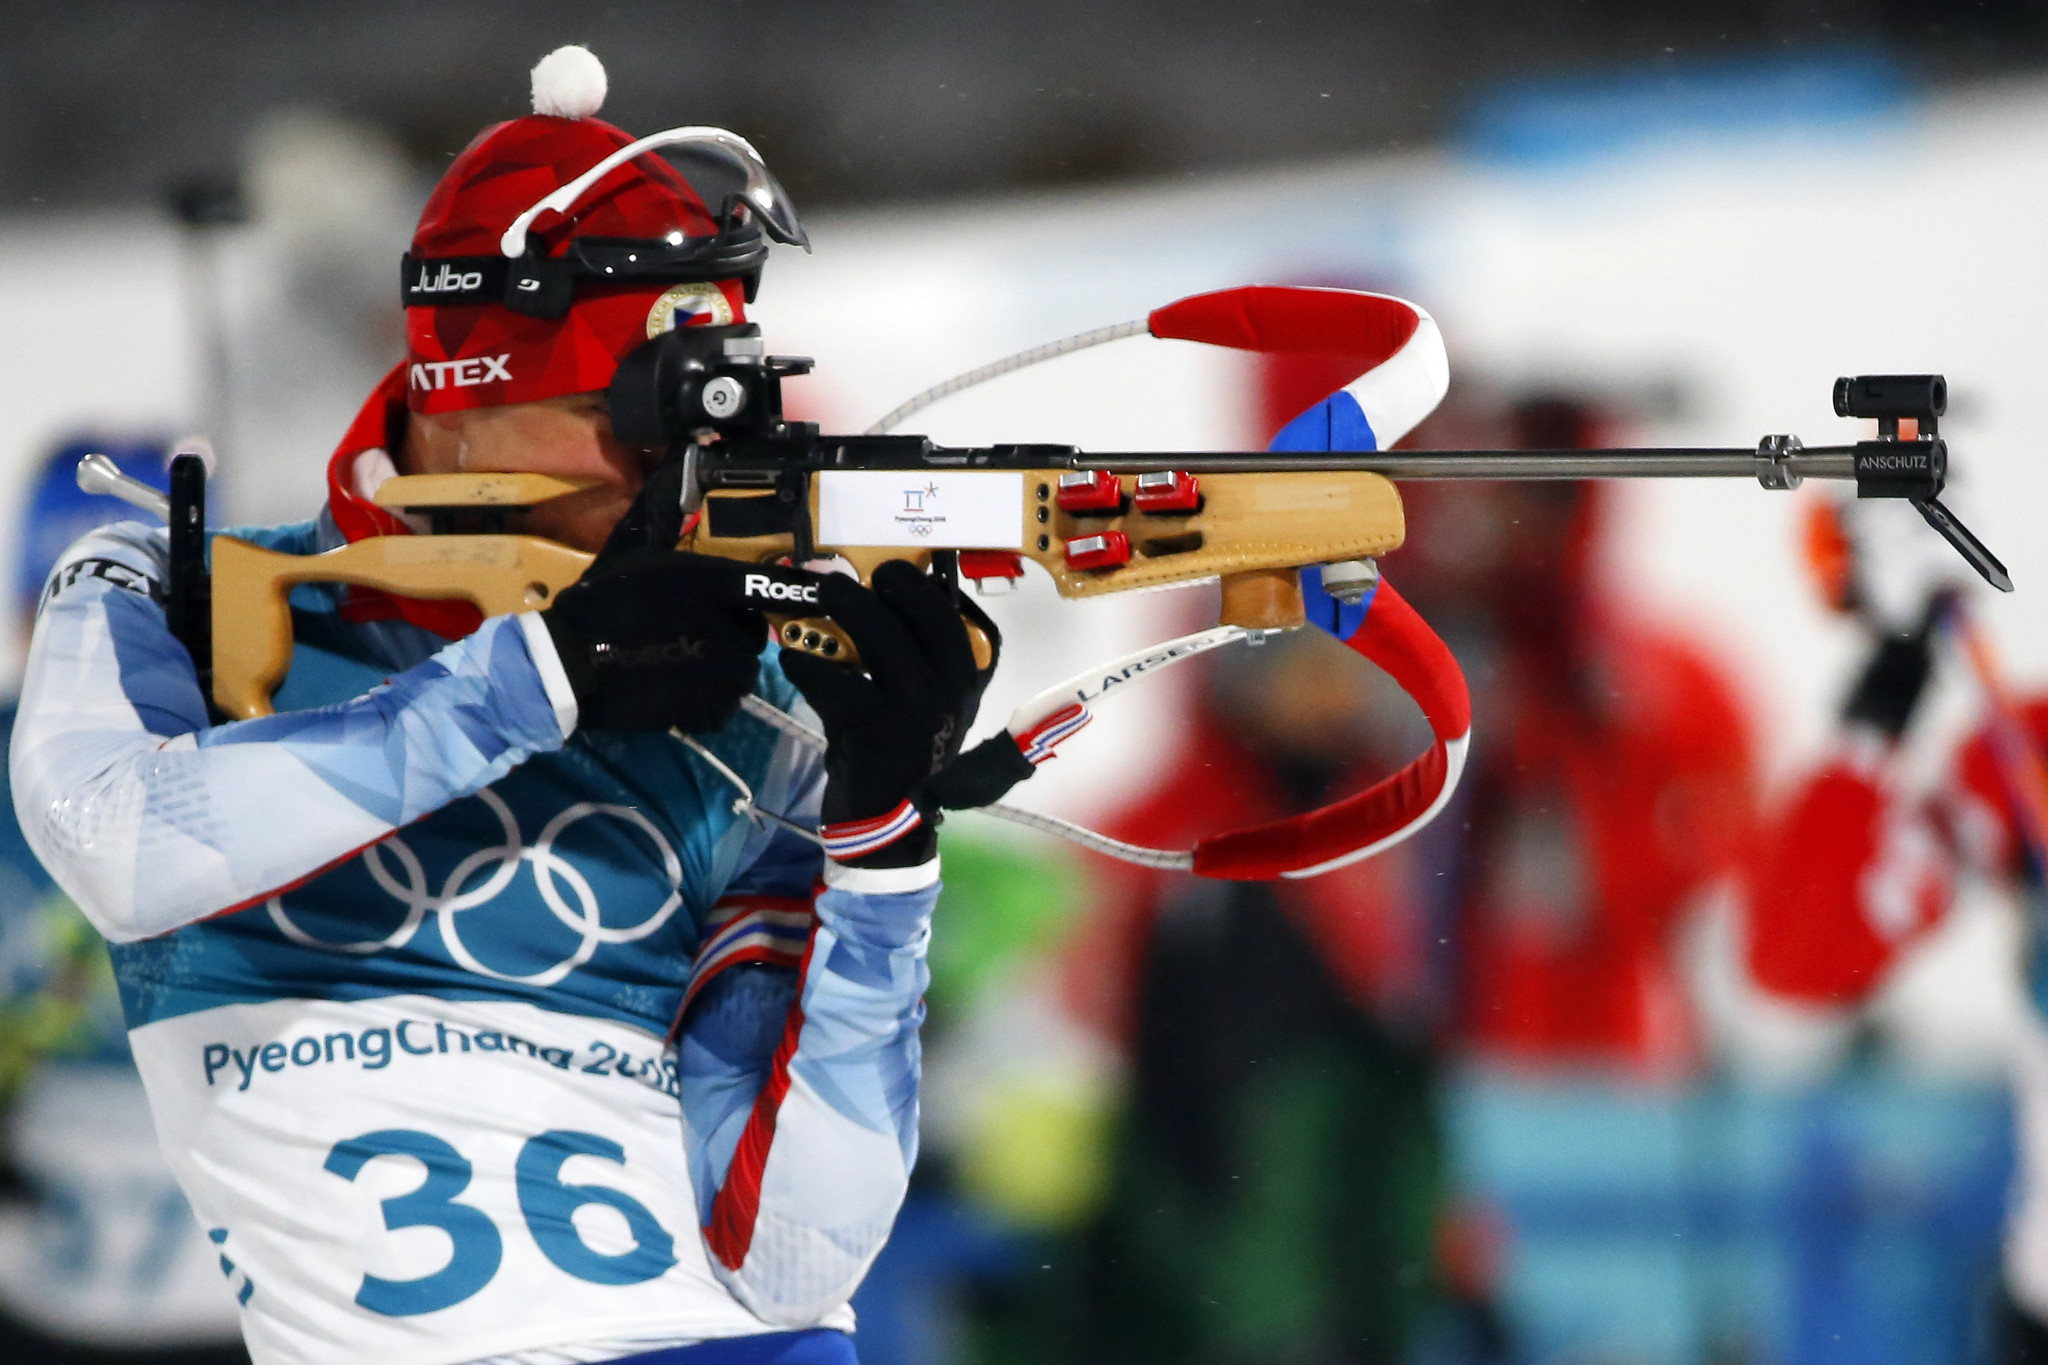 Michal Krčmář has competed at both the 2014 and 2018 Winter Olympic Games ©Getty Images